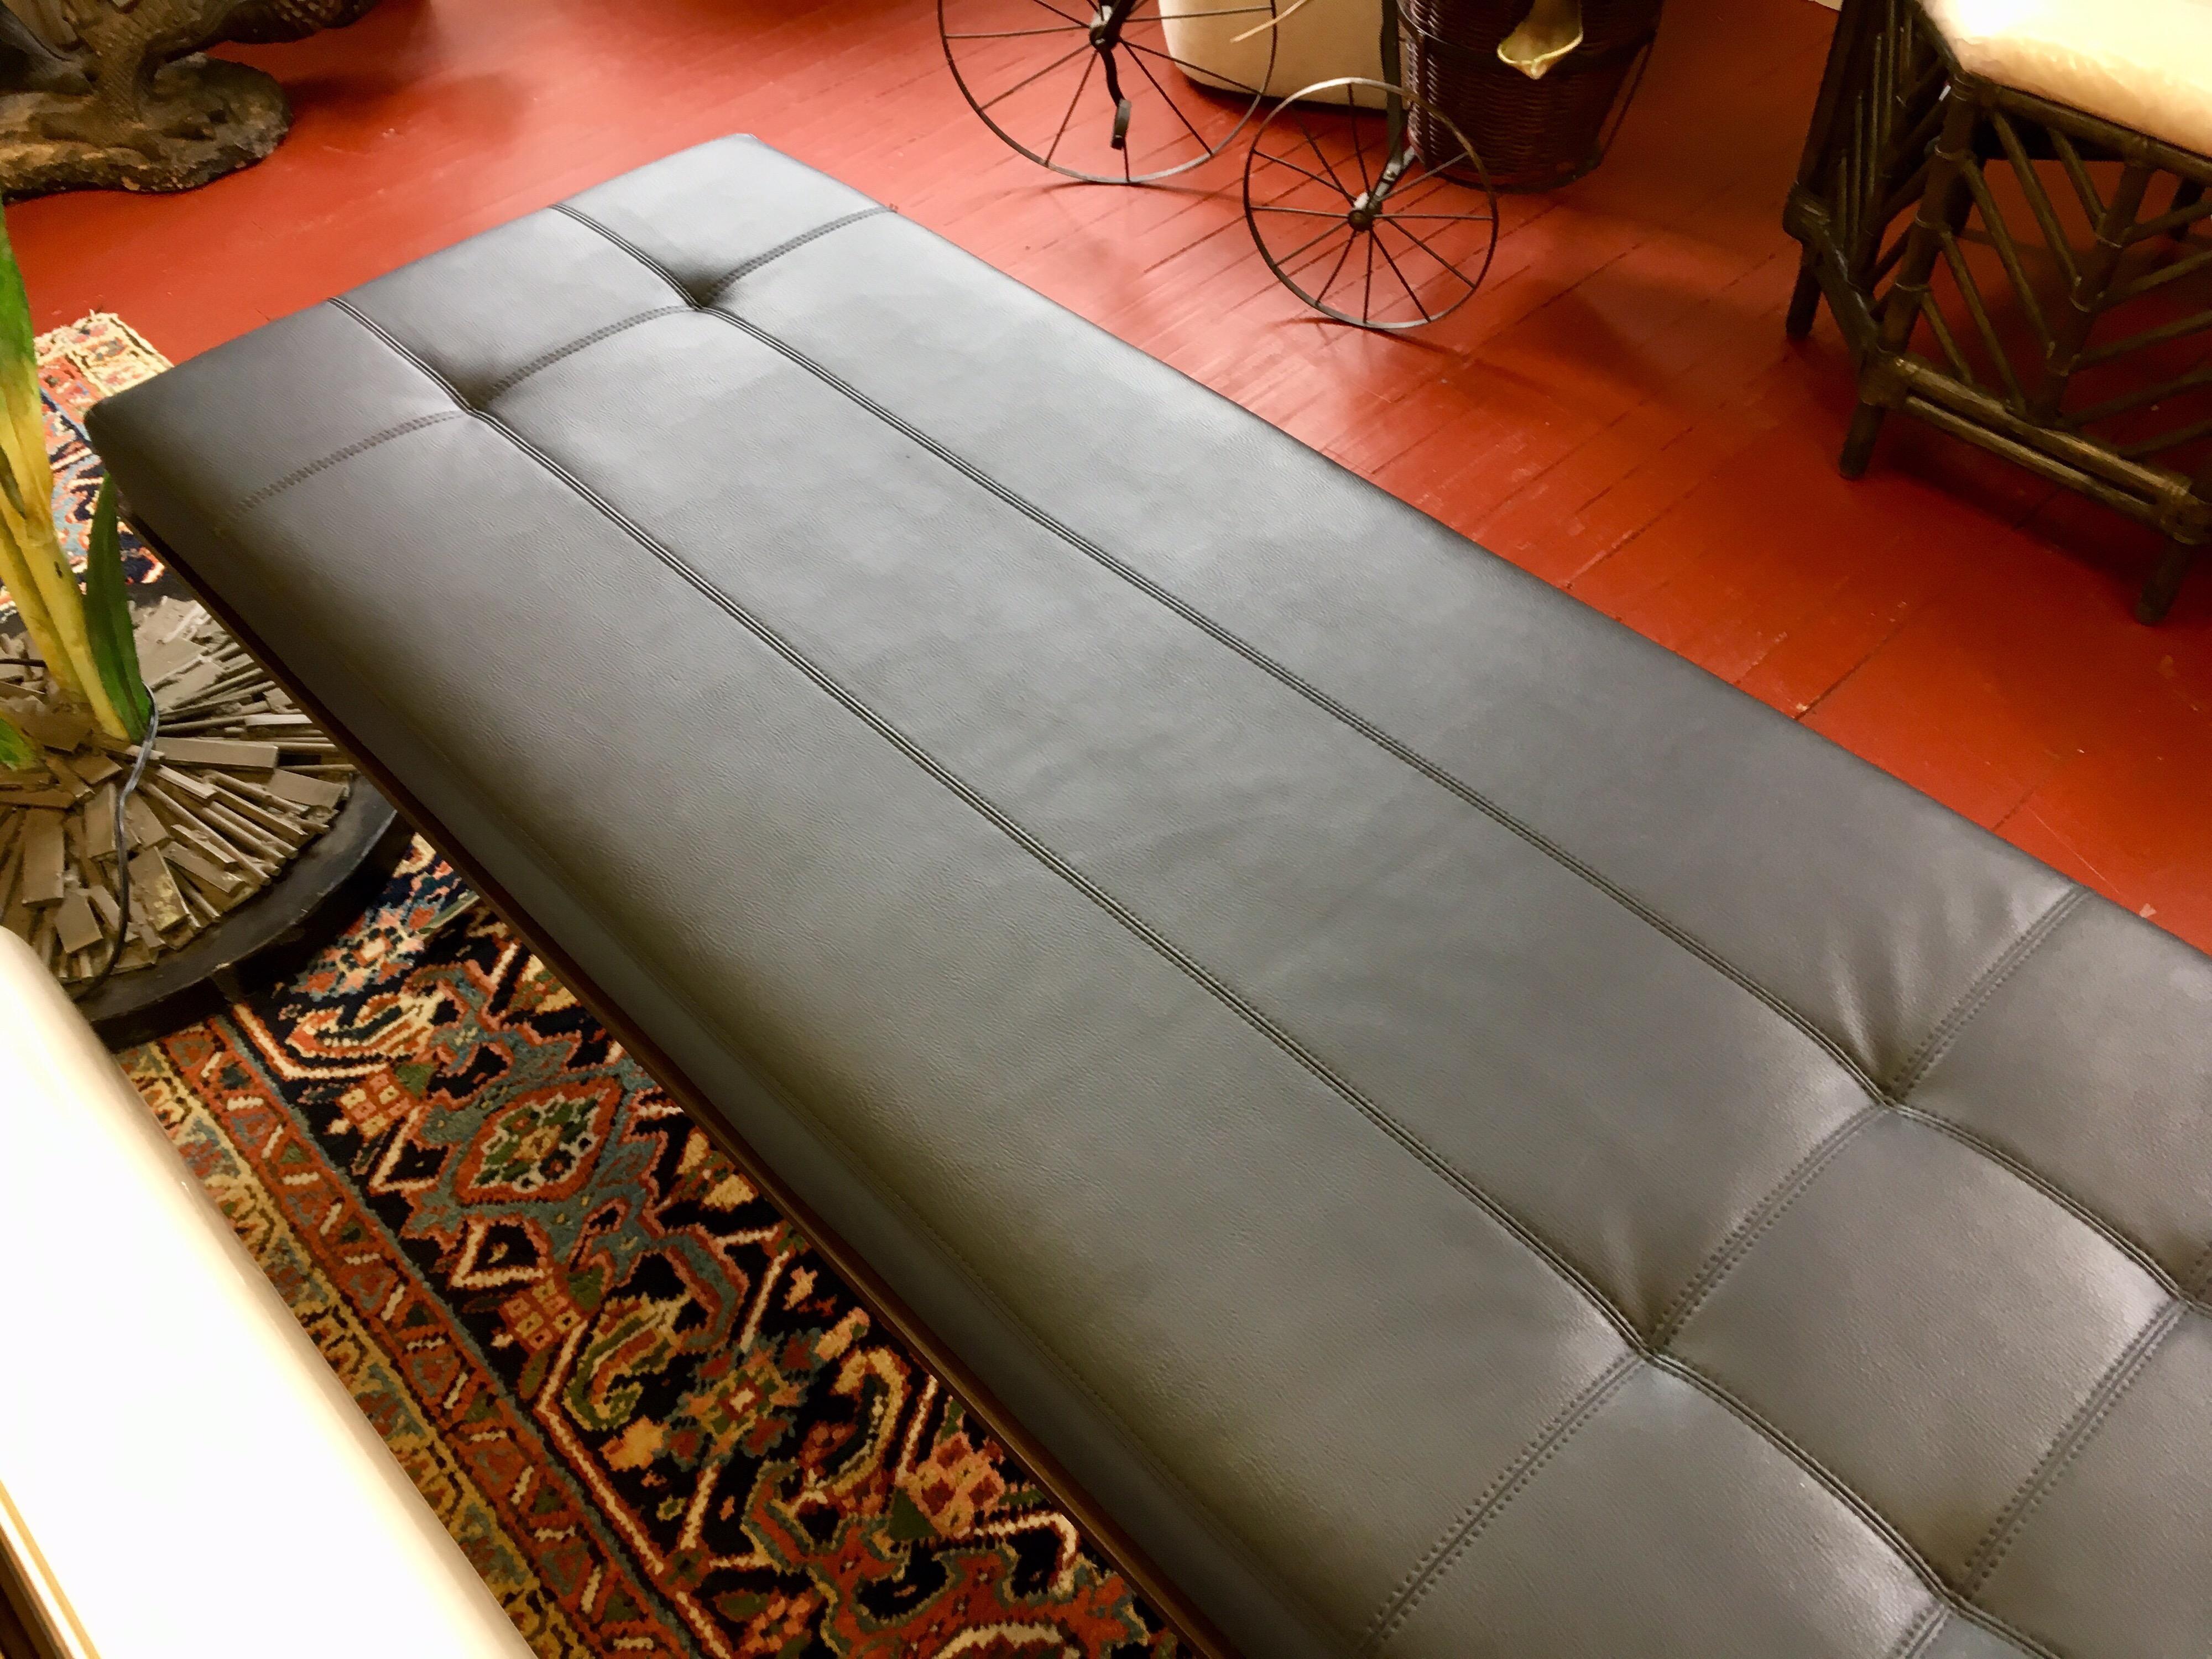 Bernhardt Black Leather and Mahogany Chaise Lounge Settee Lounger Daybed (Stahl)